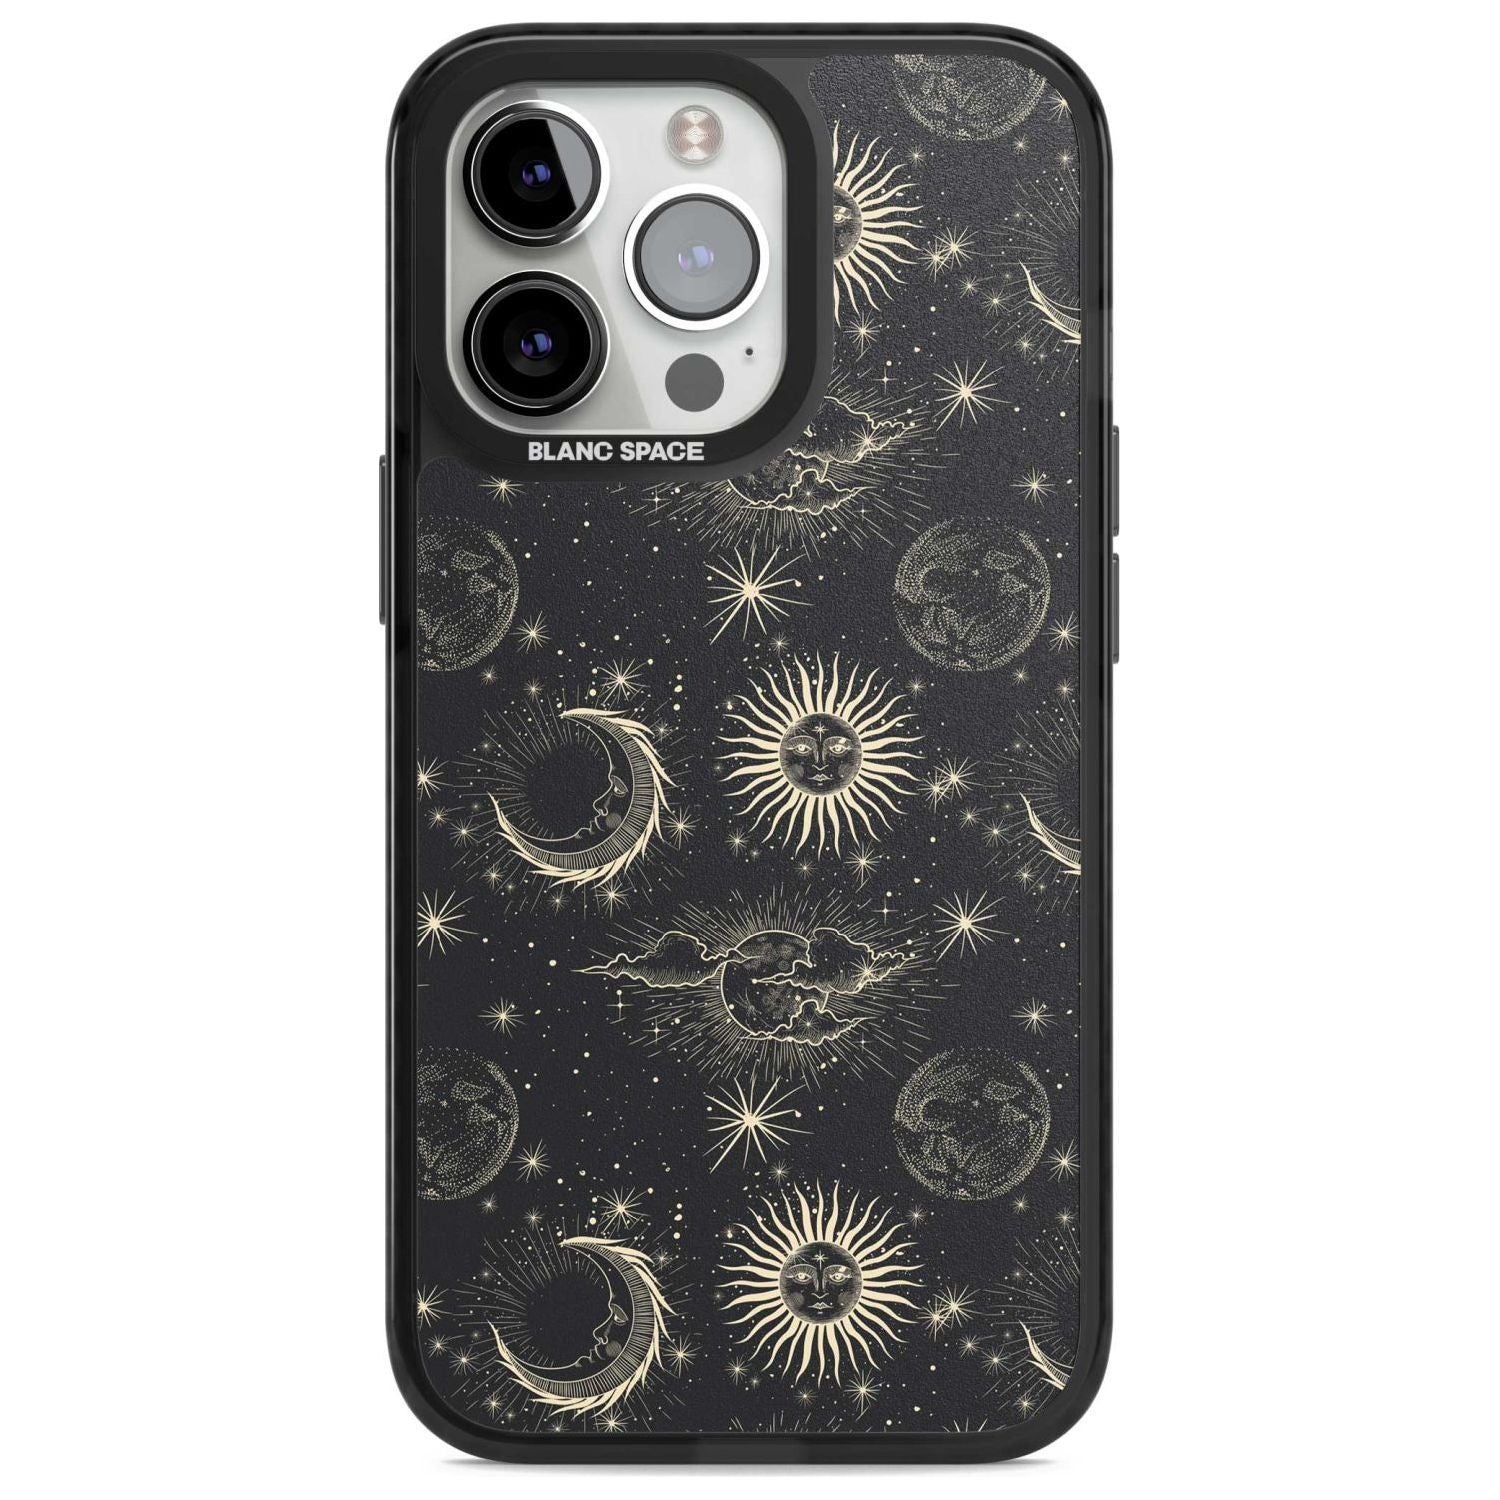 Large Suns, Moons & Clouds Astrological Phone Case iPhone 15 Pro Max / Magsafe Black Impact Case,iPhone 15 Pro / Magsafe Black Impact Case,iPhone 14 Pro Max / Magsafe Black Impact Case,iPhone 14 Pro / Magsafe Black Impact Case,iPhone 13 Pro / Magsafe Black Impact Case Blanc Space